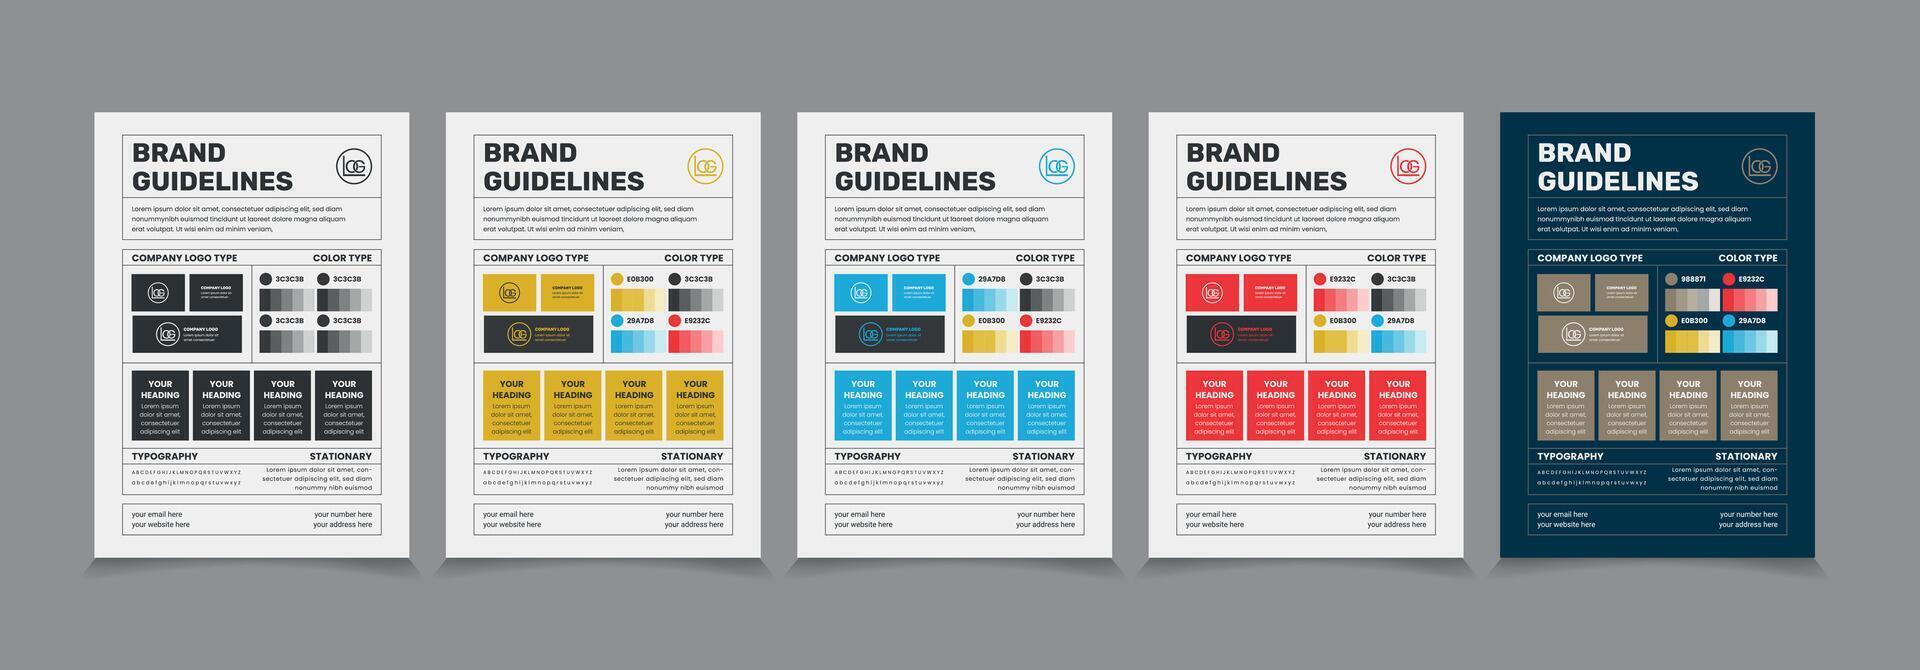 A4 Brand Guidelines Poster Layout Set, Simple style and modern Brand Guidelines, Brand identity Template vector